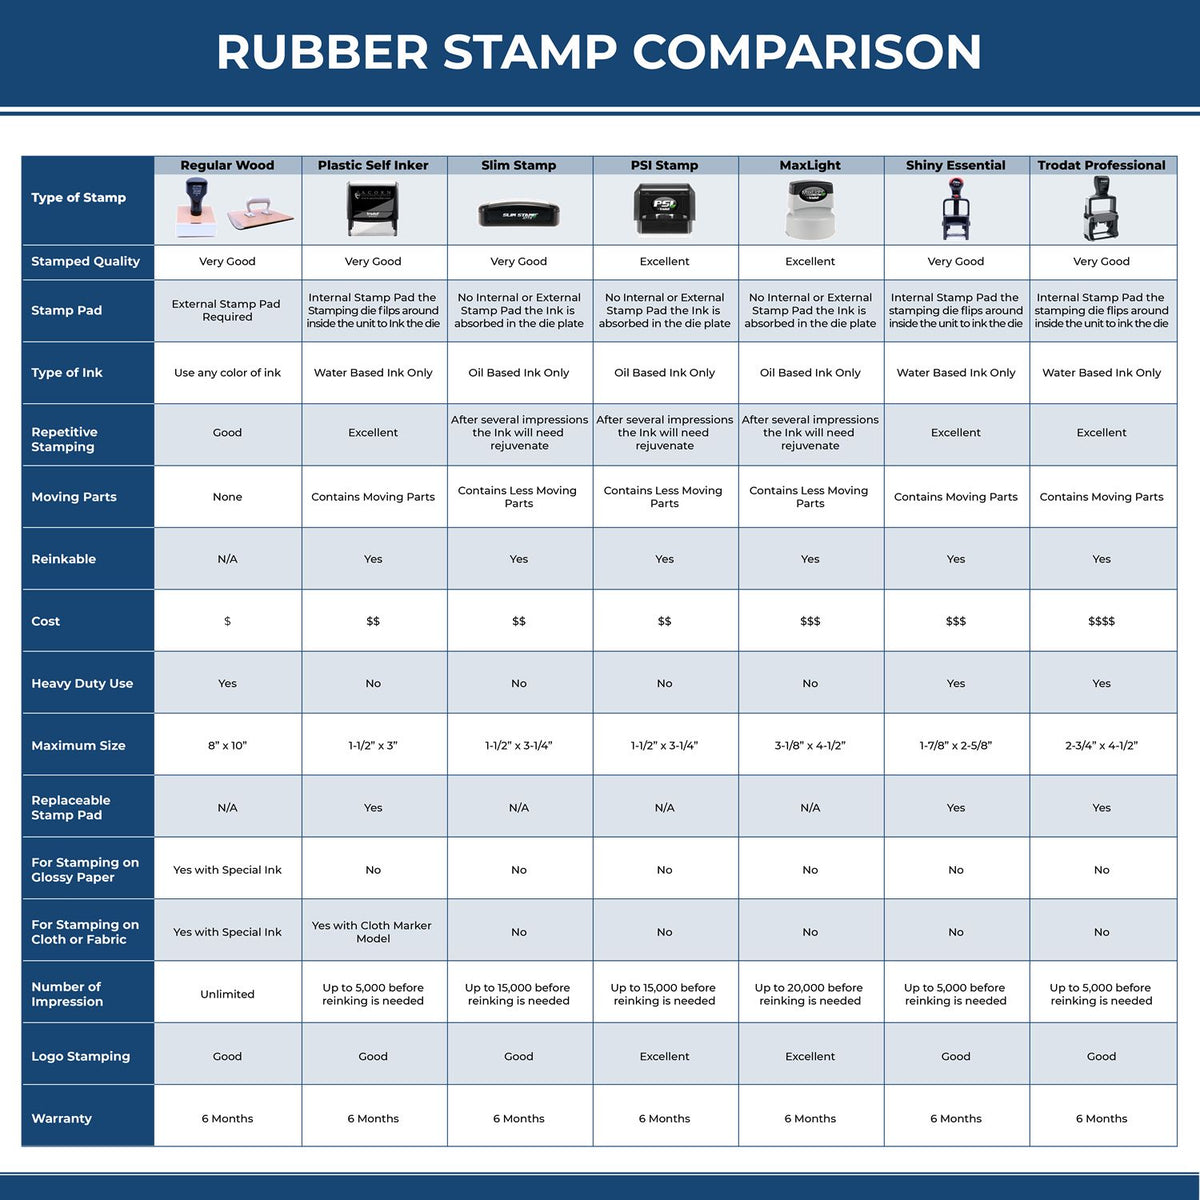 Large Self-Inking Confirmation Stamp 4902S Rubber Stamp Comparison